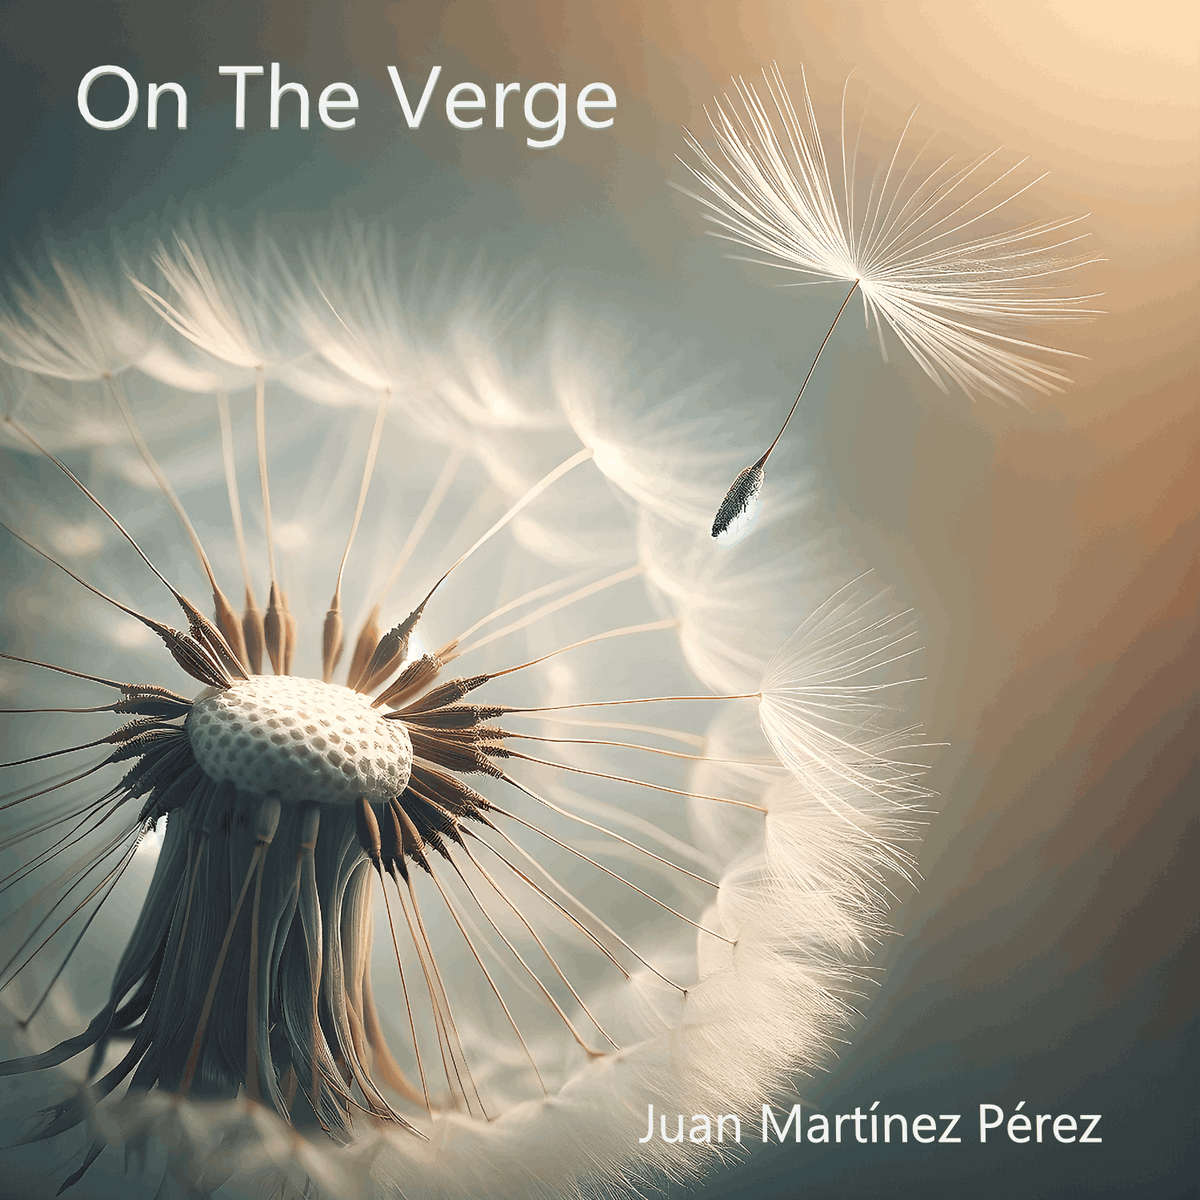 My upcoming release 'On The Verge' is due on April 19th. It's an acoustic exploration of the moments preceding significant events, setting the stage for a new musical adventure soon coming your way. If you like, pre-save: florecillarecords.lnk.to/OnTheVerge @pandoraAMP @spotify @deezer